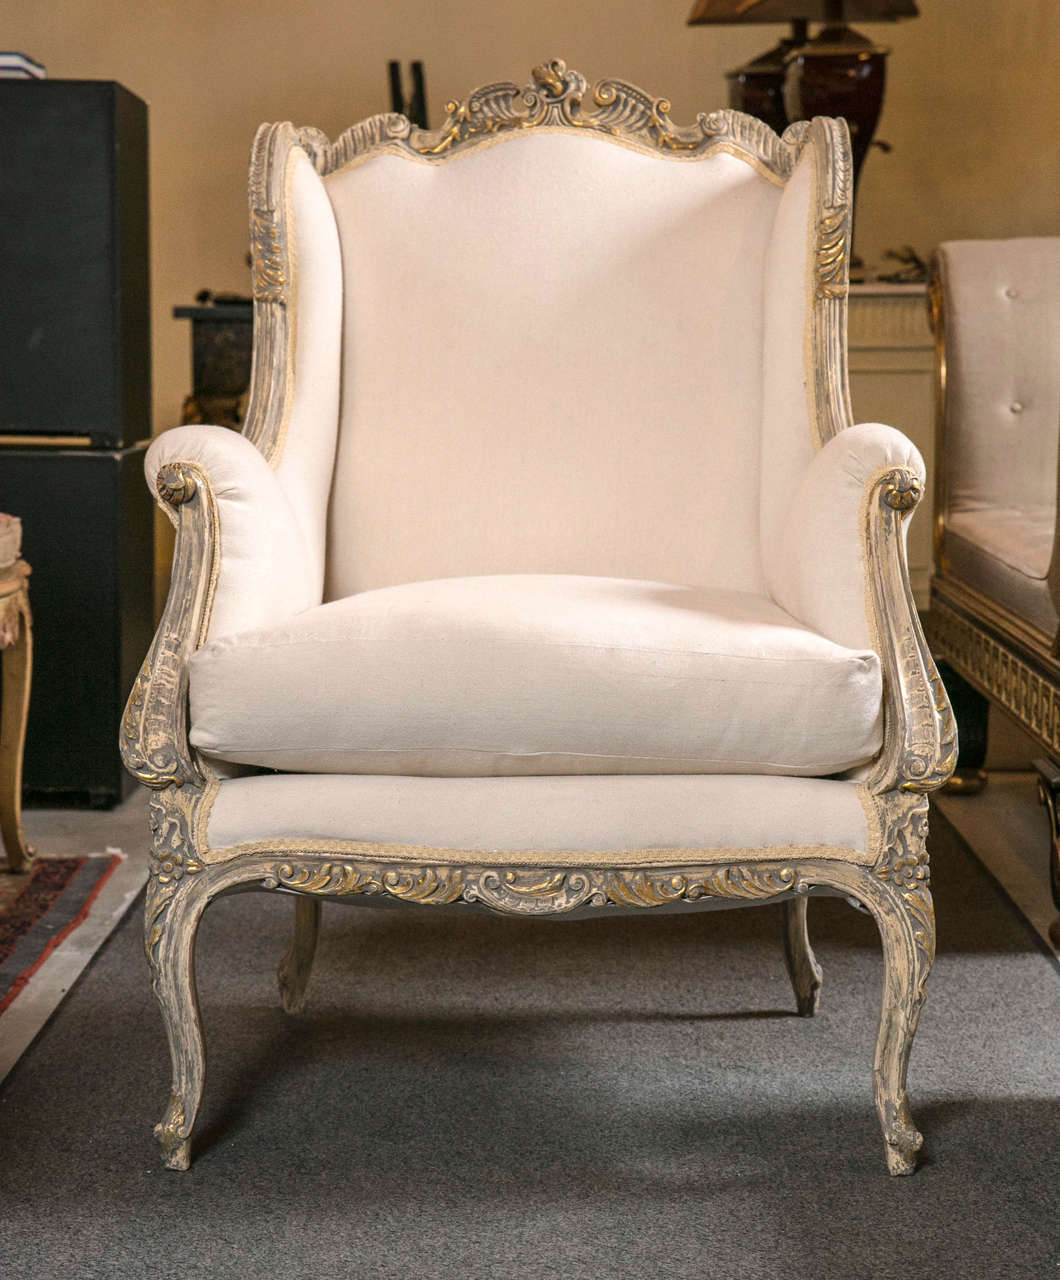 Pair of vintage French Rococo style wingback bergère chairs, circa 1940s, decorated in this gorgeous distressed ivory/grey finish and parcel-gilding, the shell and scroll crest leading to winged sides and scrolled arms, padded back and cushioned